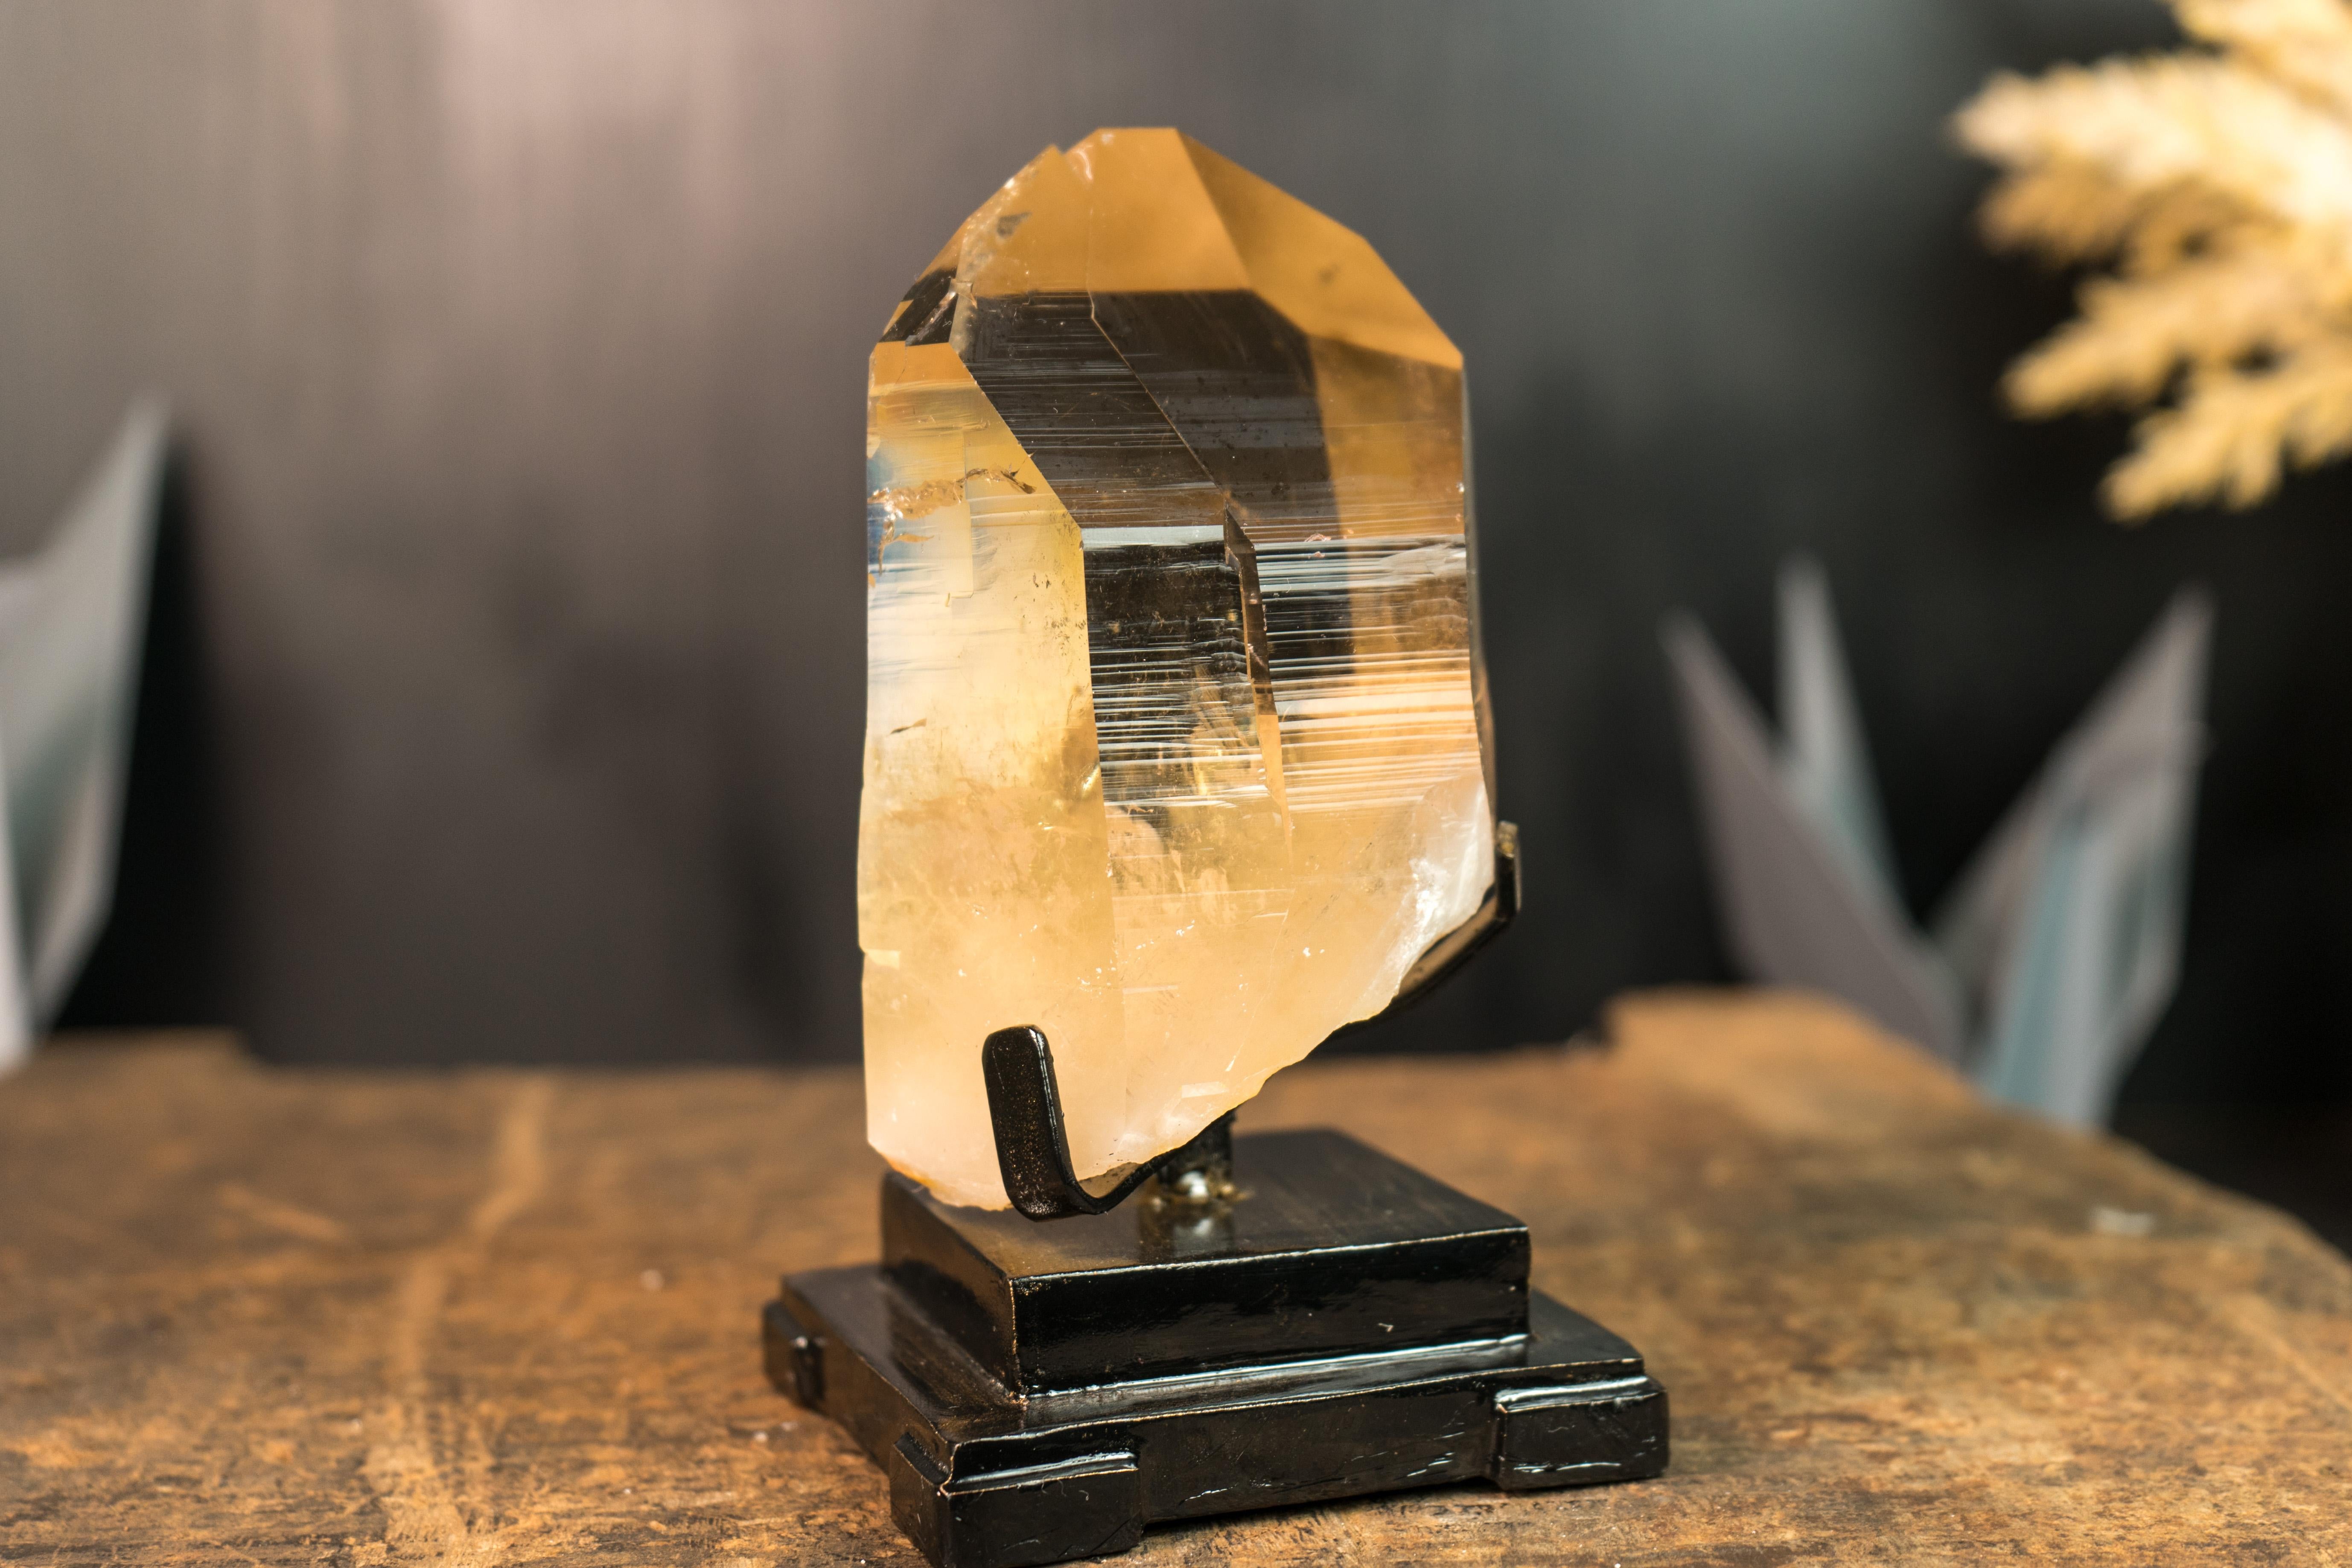 Real Water Clear Golden Orange Citrine, A Natural Citrine of Exceptional Beauty

▫️ Description

A spectacular specimen from the famous mines of Araçuaí, Brazil, this Natural Citrine brings unparalleled beauty It is a rare creation from Nature with